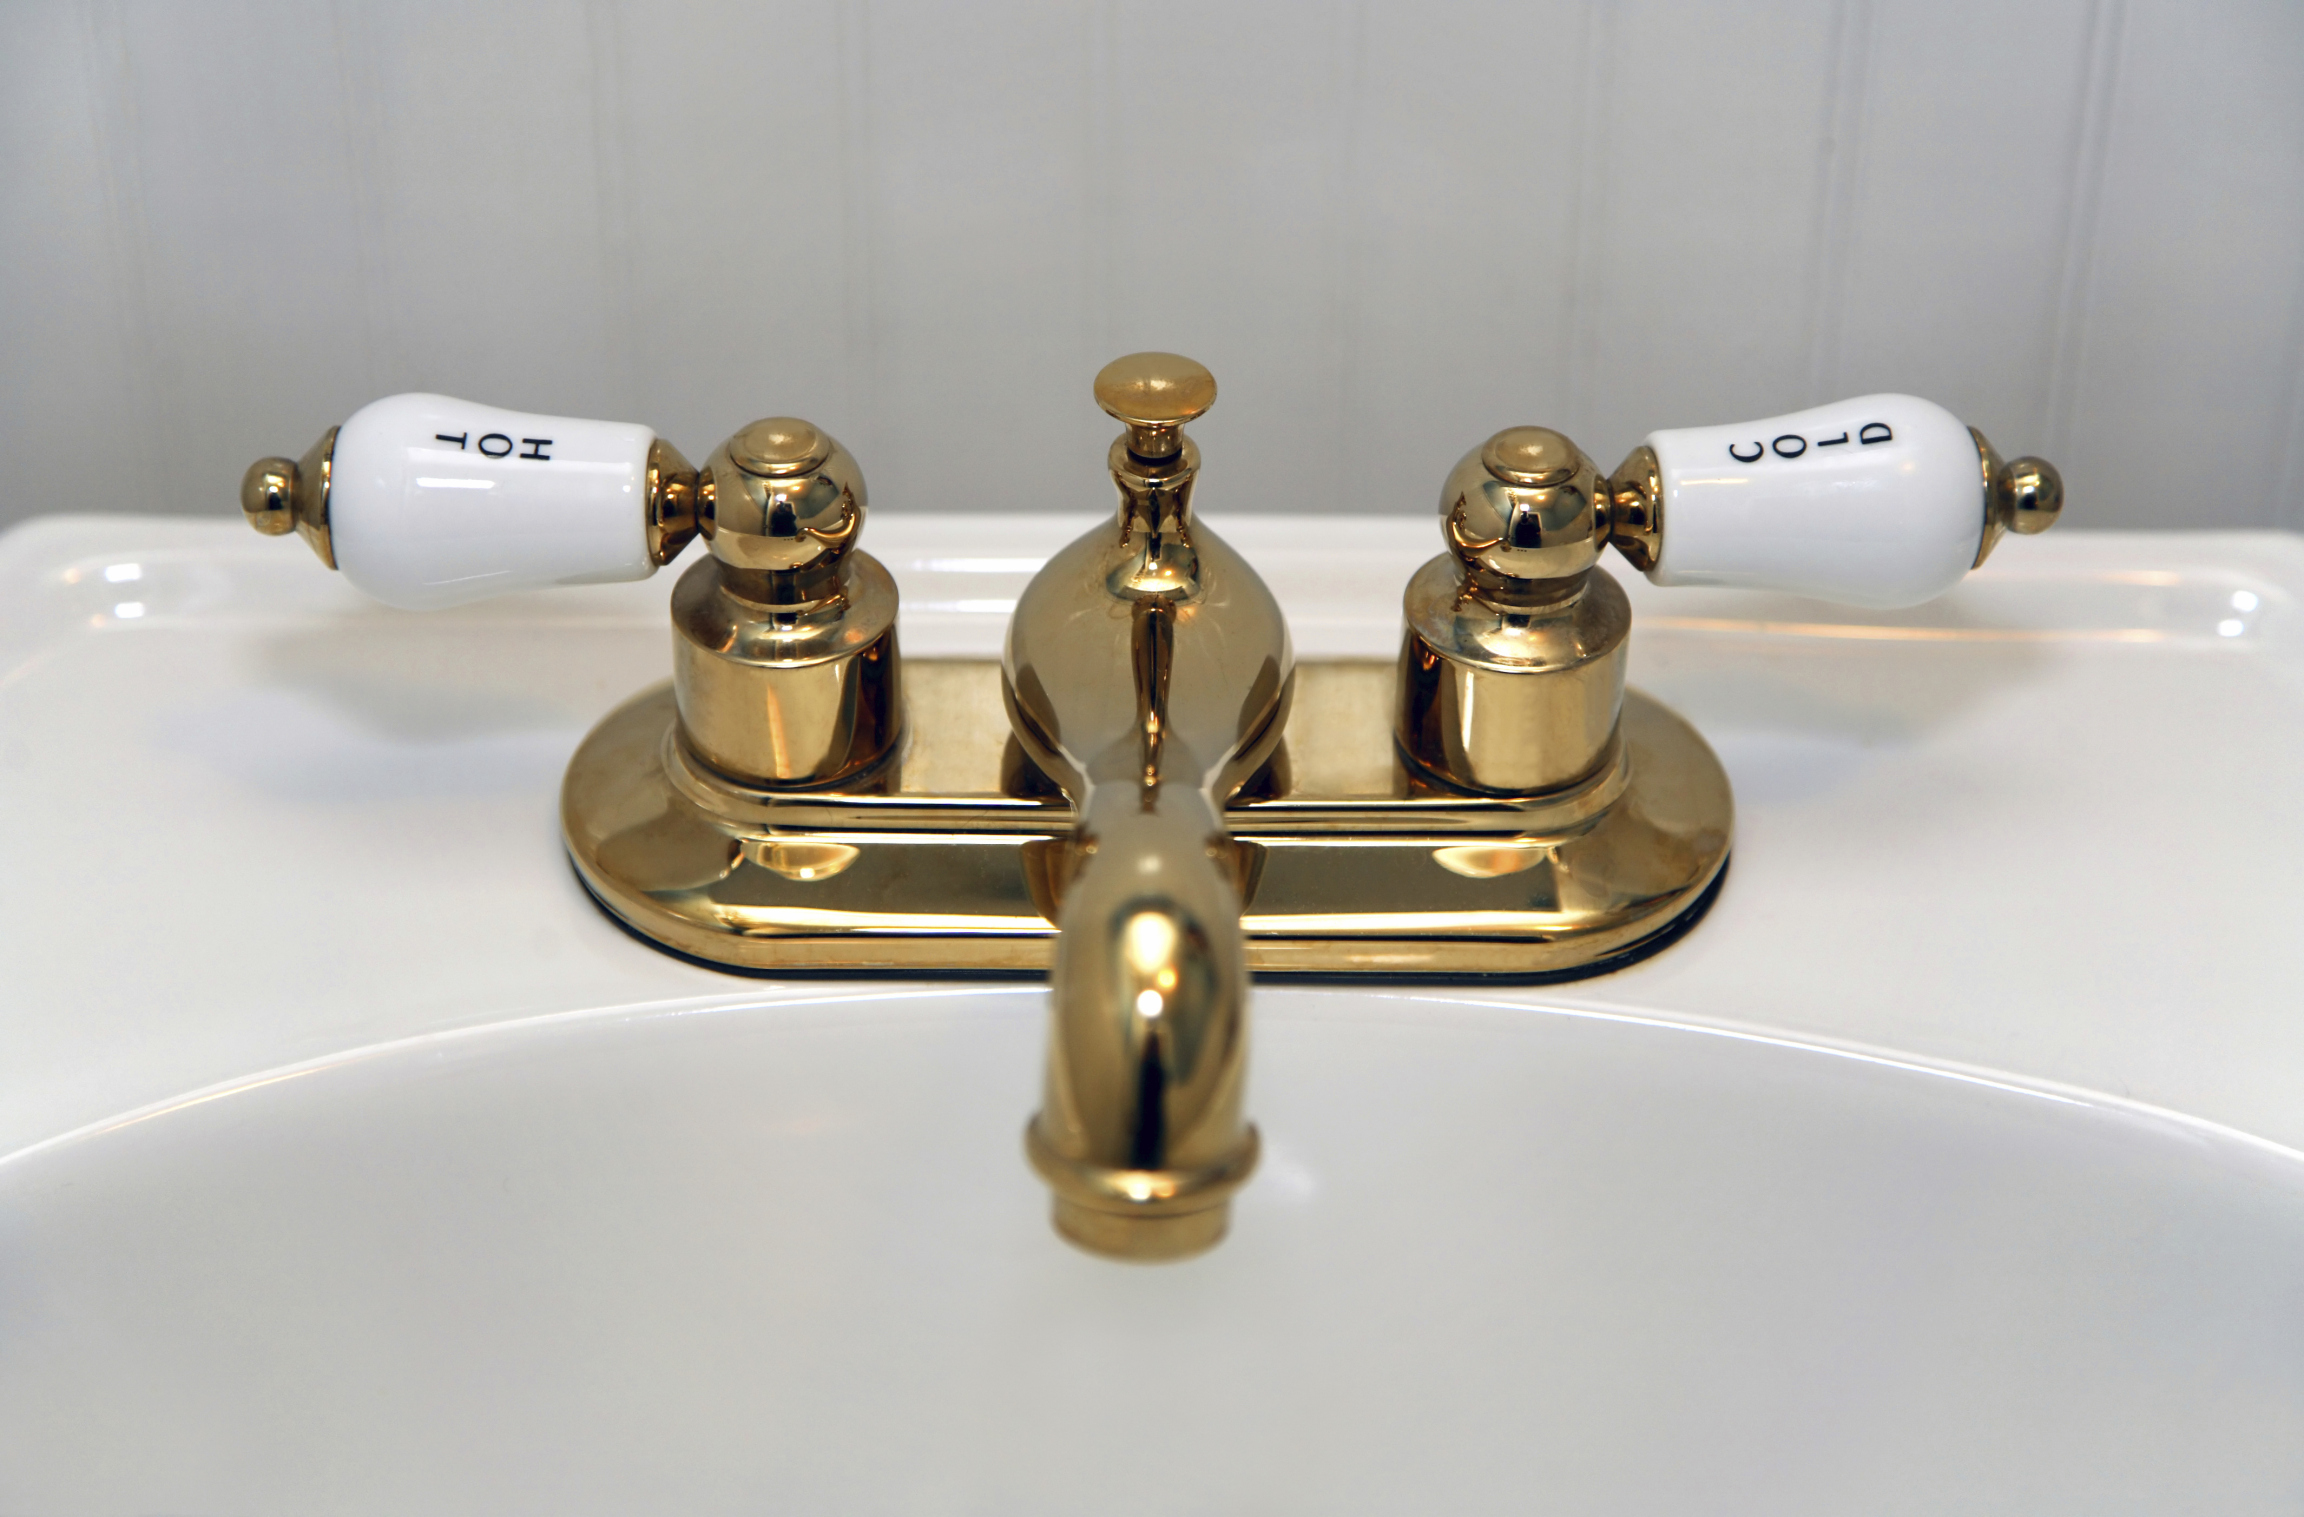 How to Get an Antique Brass Faucet for Way Less